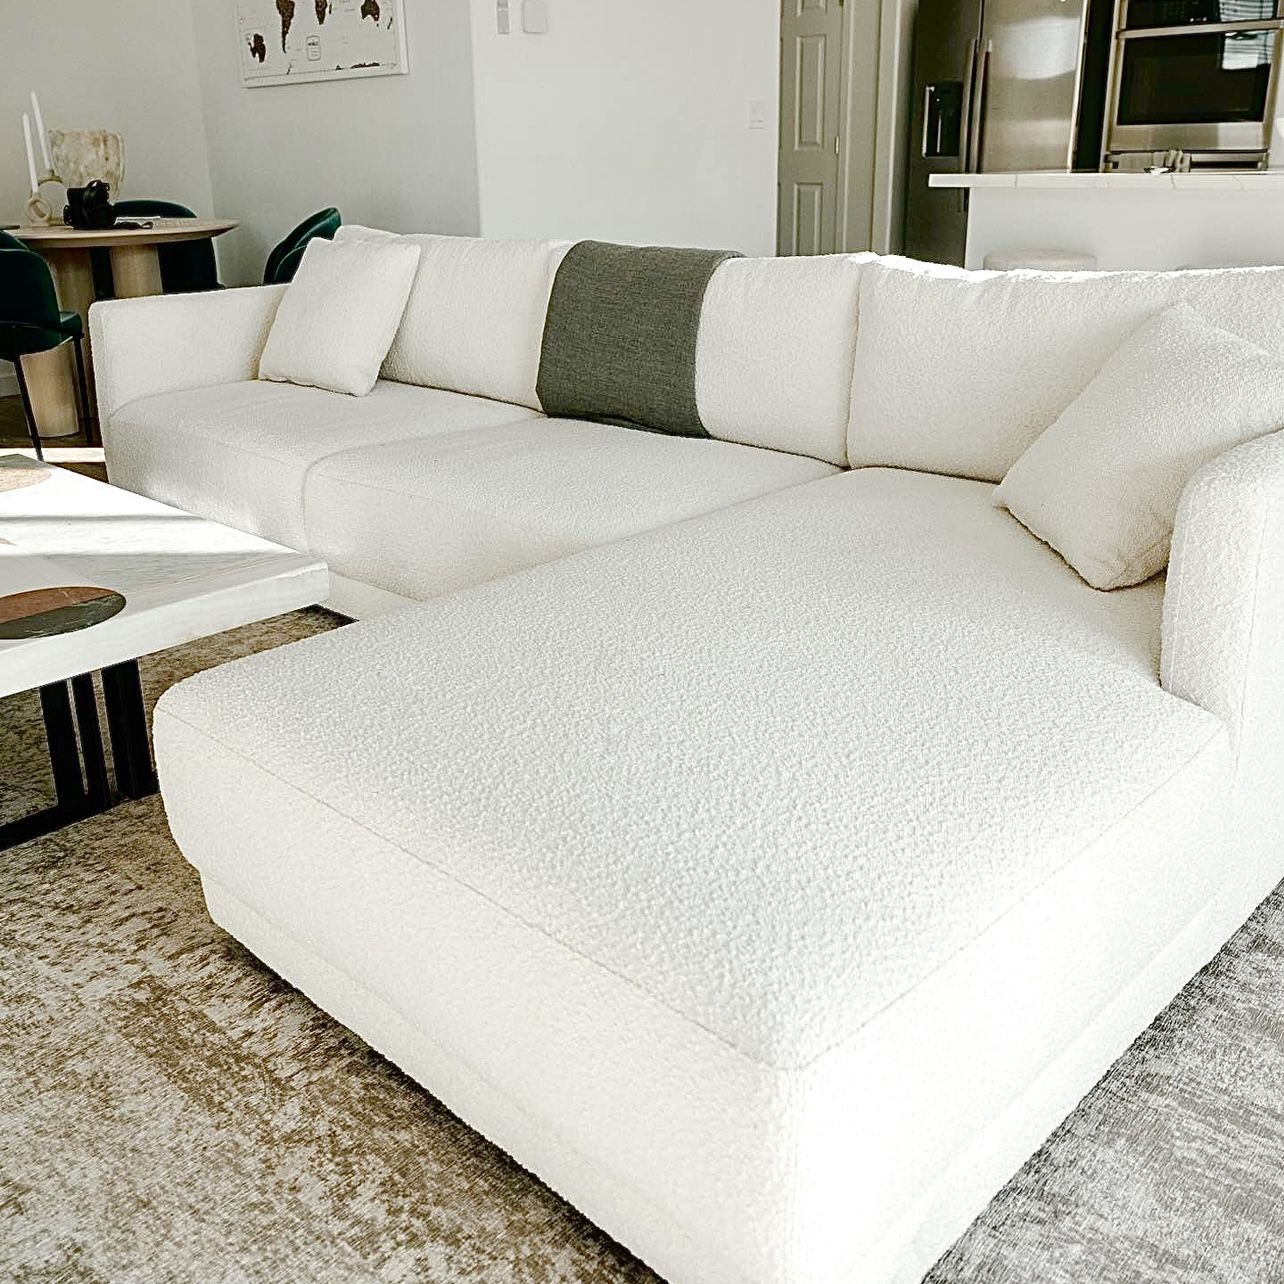 New in-box Lulu & Georgia White Bouclé Sectional Sofa, Free Same-Day Home Delivery,  Wholesale Discounted Prices 